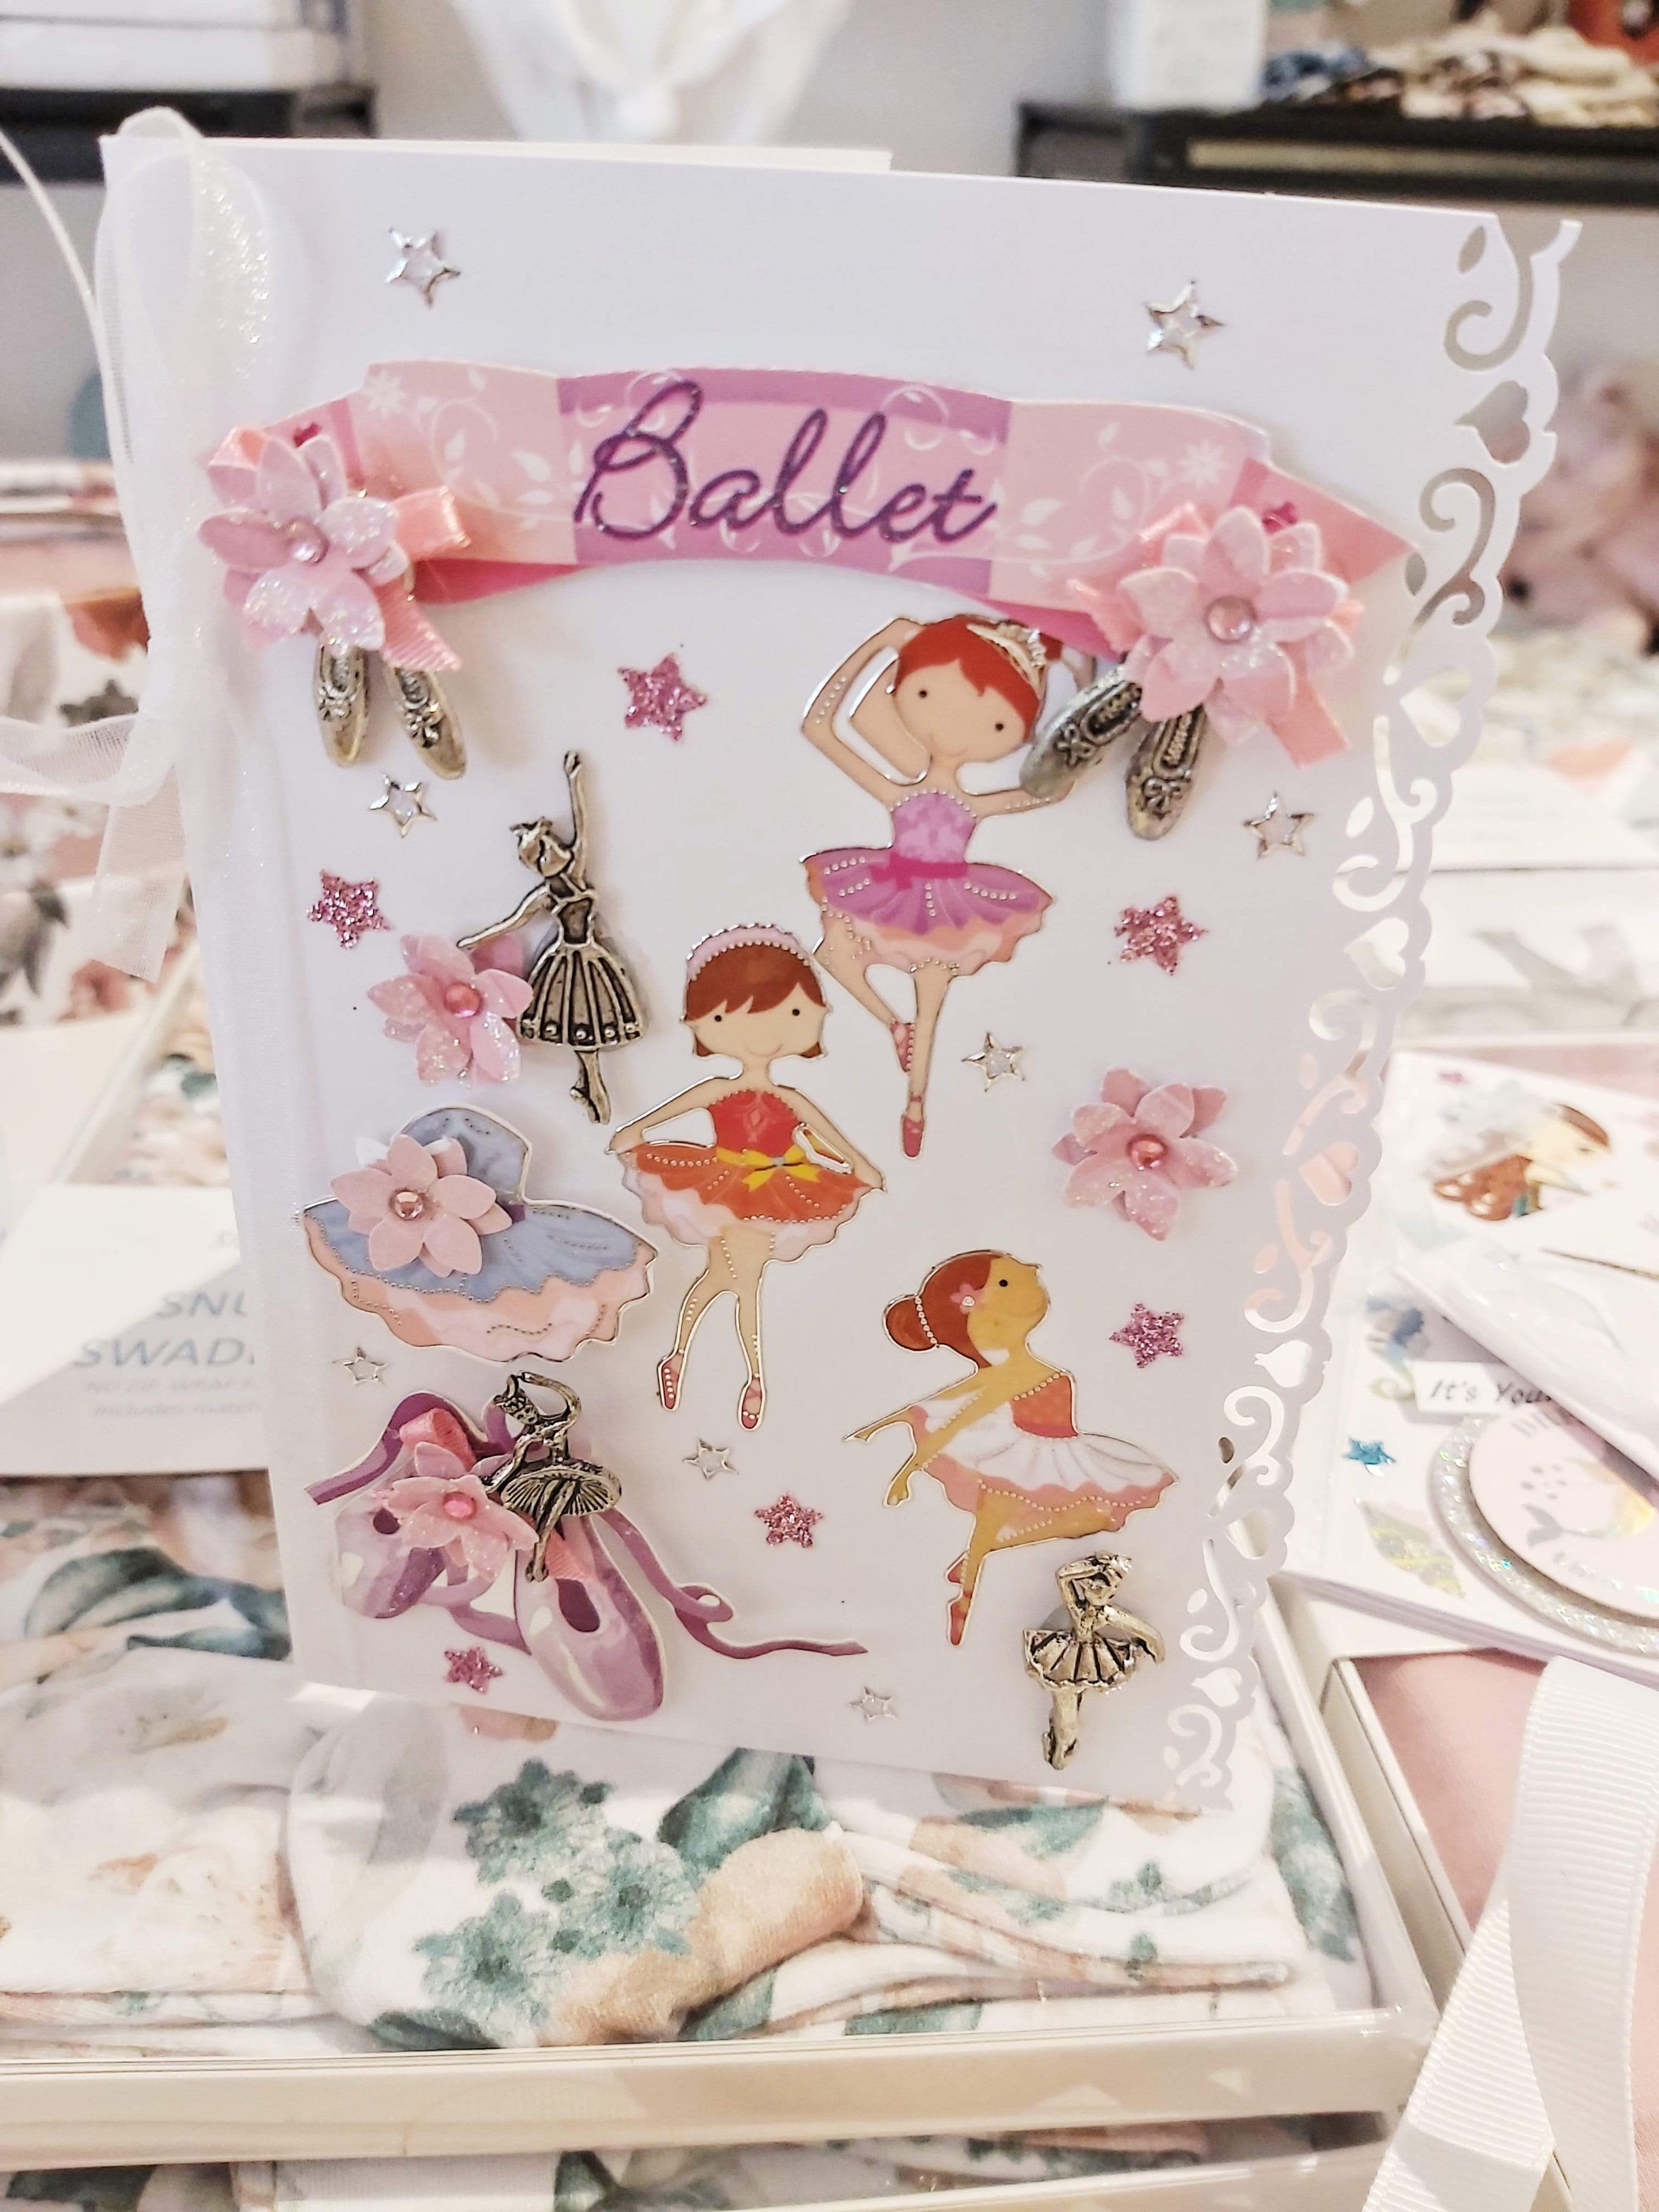 Cards by Trish Childrens Gifts Ballet Handmade Gift Card